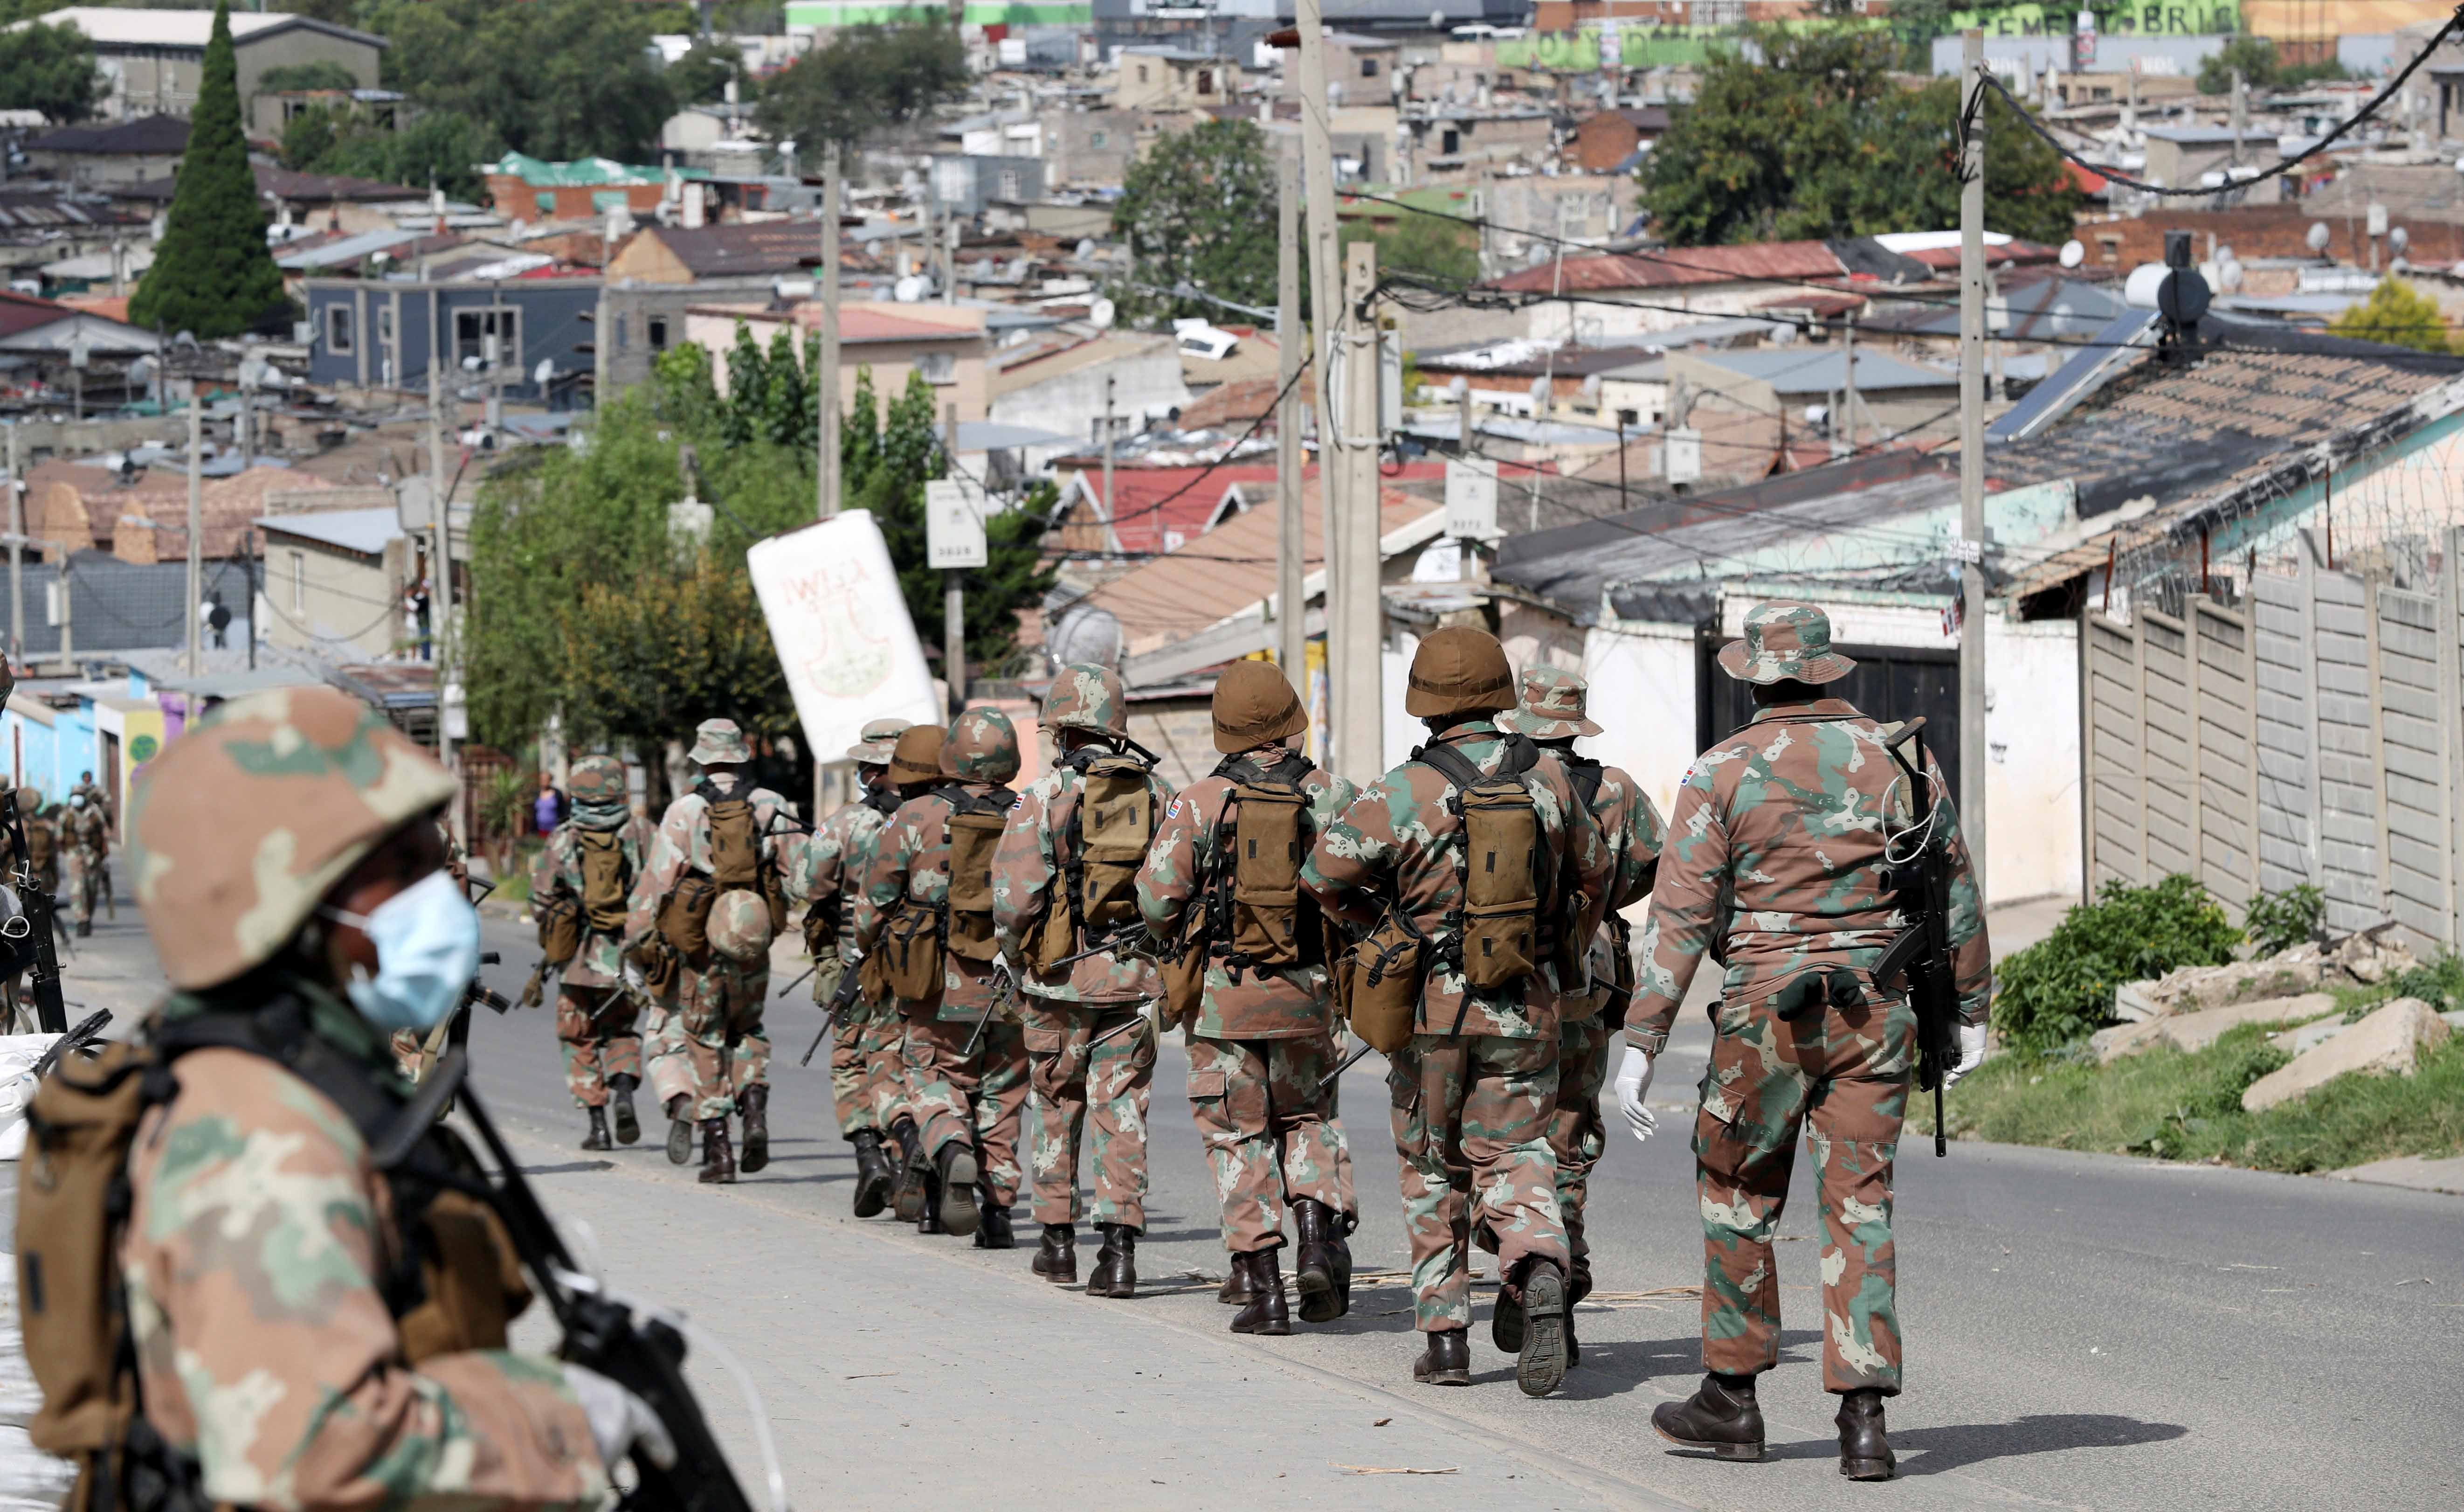 Soldiers patrol the streets in an attempt to enforce a 21 day nationwide lockdown, aimed at limiting the spread of coronavirus disease (COVID-19), in Alexandra township, South Africa, March 28, 2020.